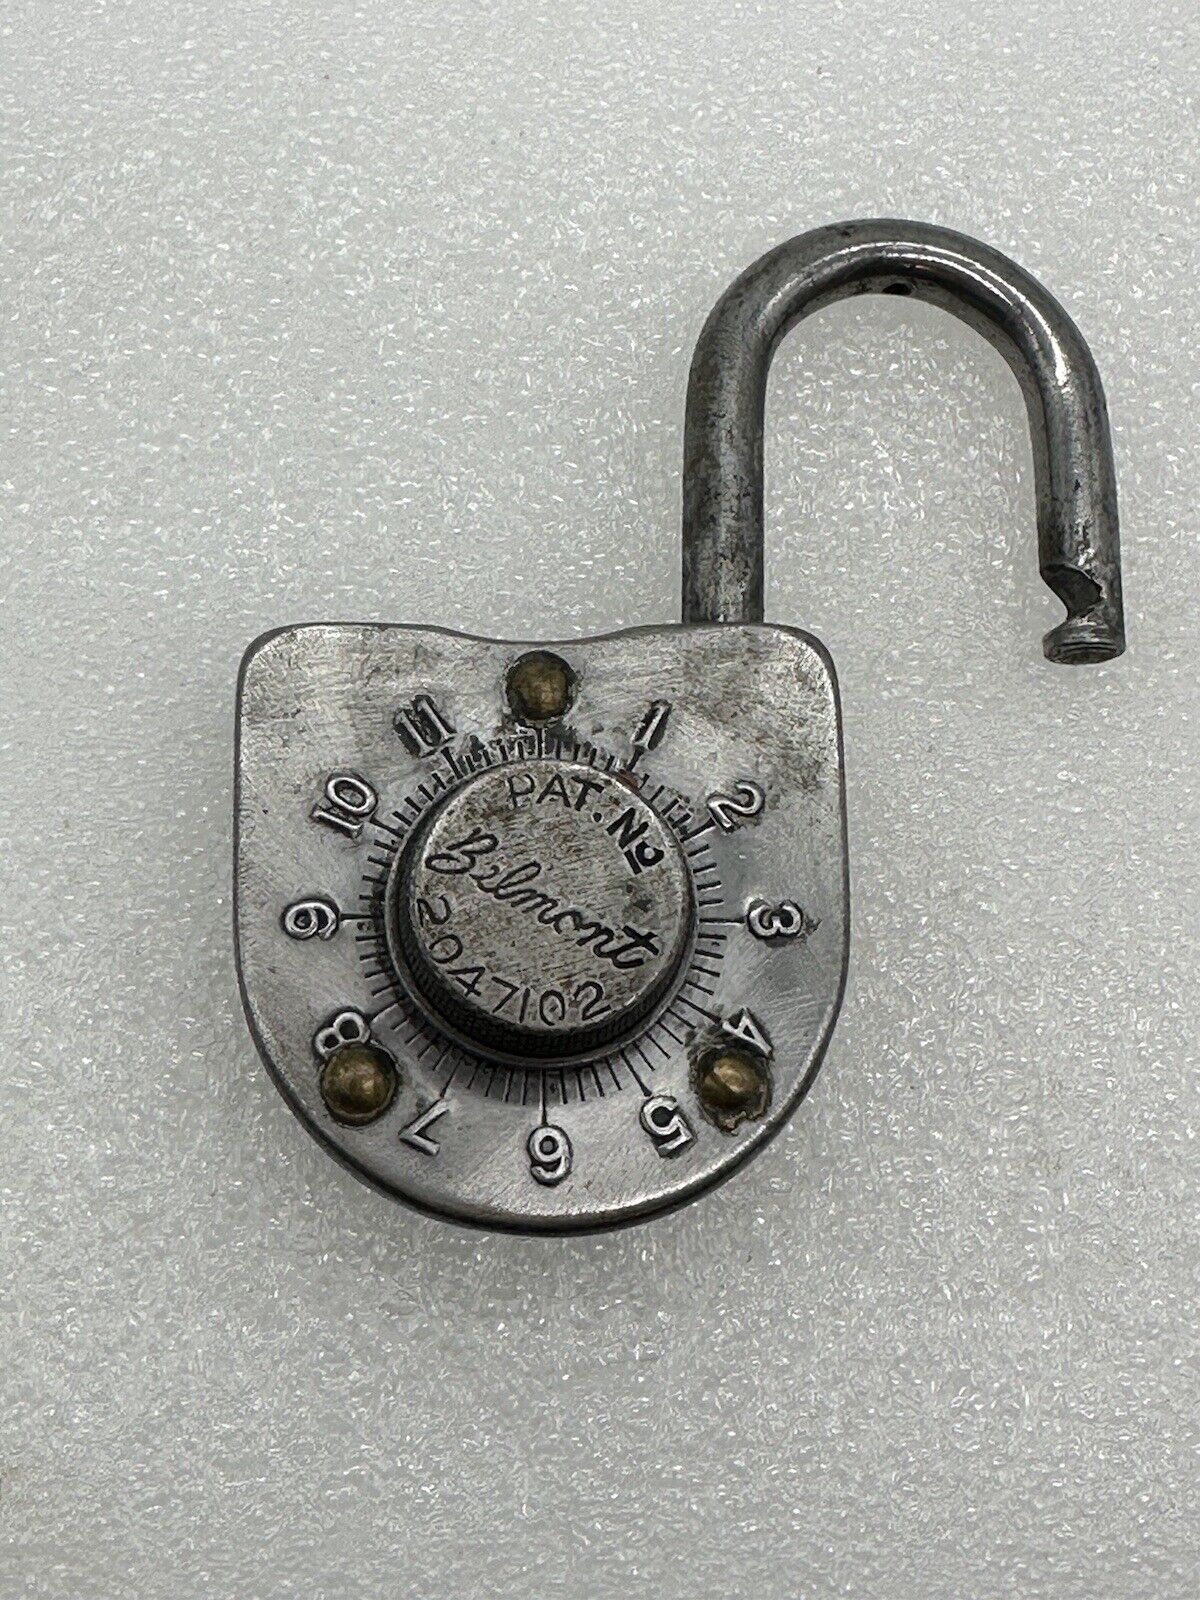 Vintage Belmont Combination Padlock No. 2047102 With 2 Number Combo